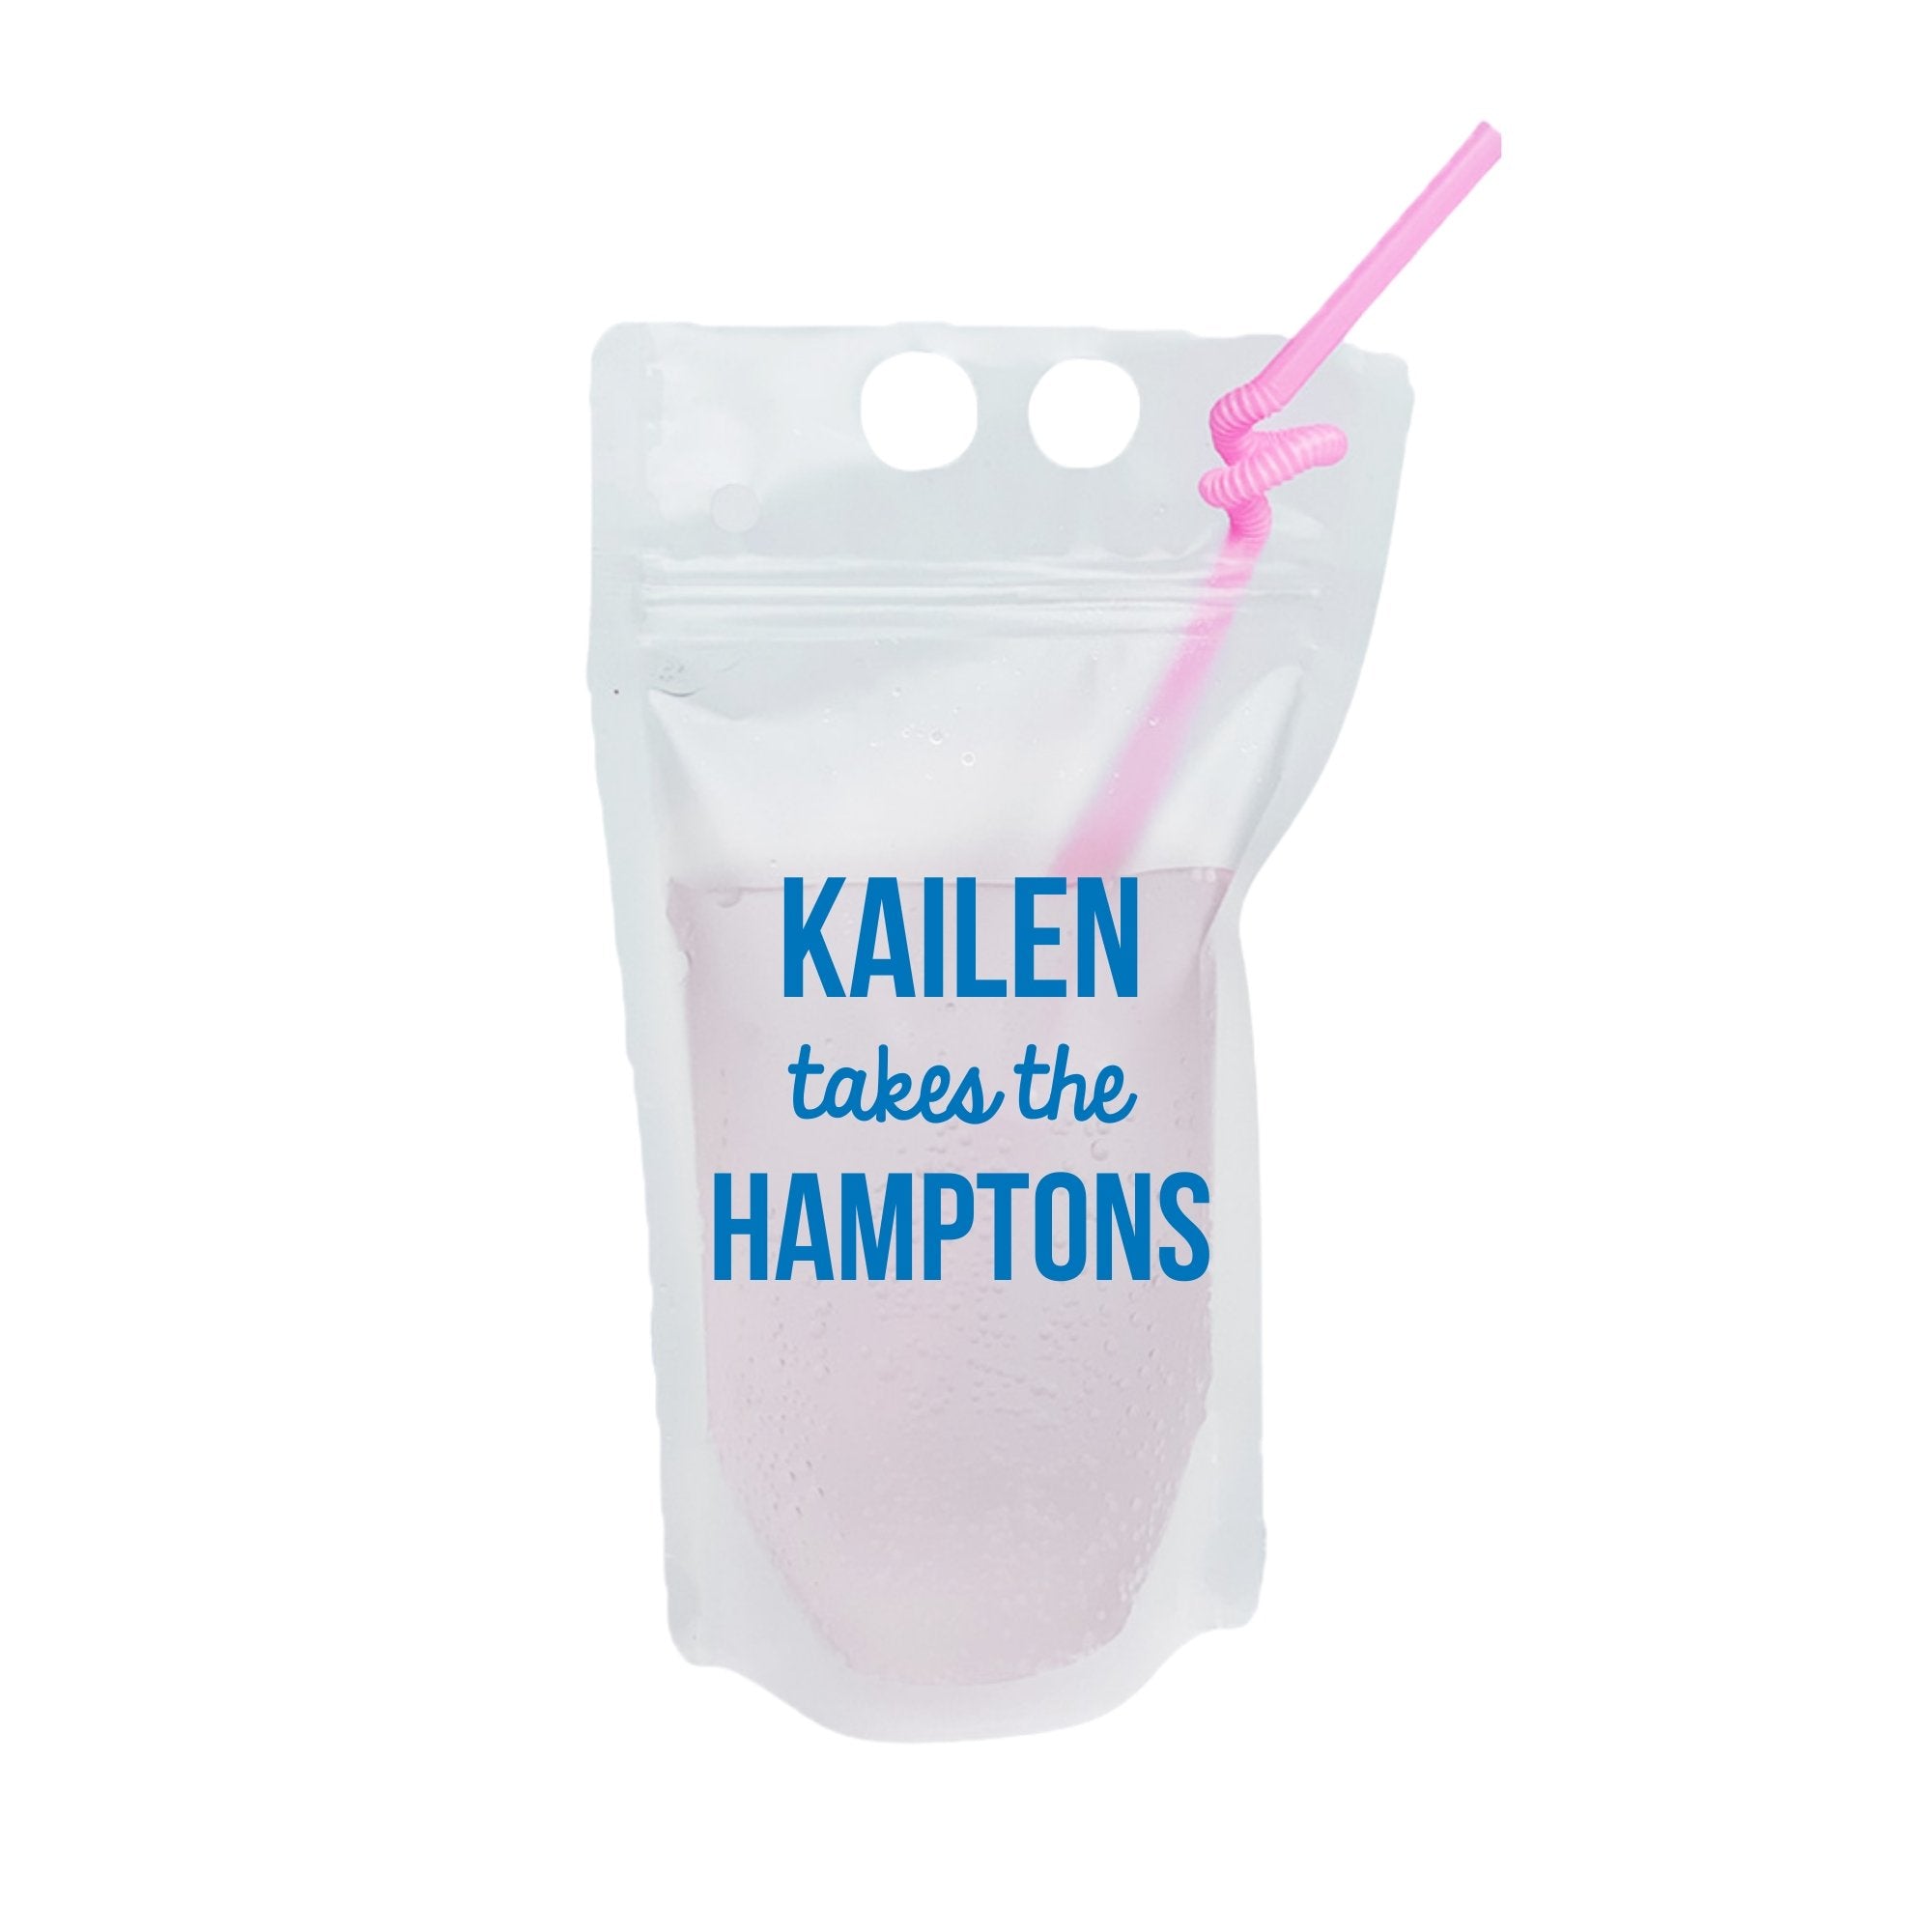 A party pouch is customized with blue text which says "Kailen takes the Hamptons"